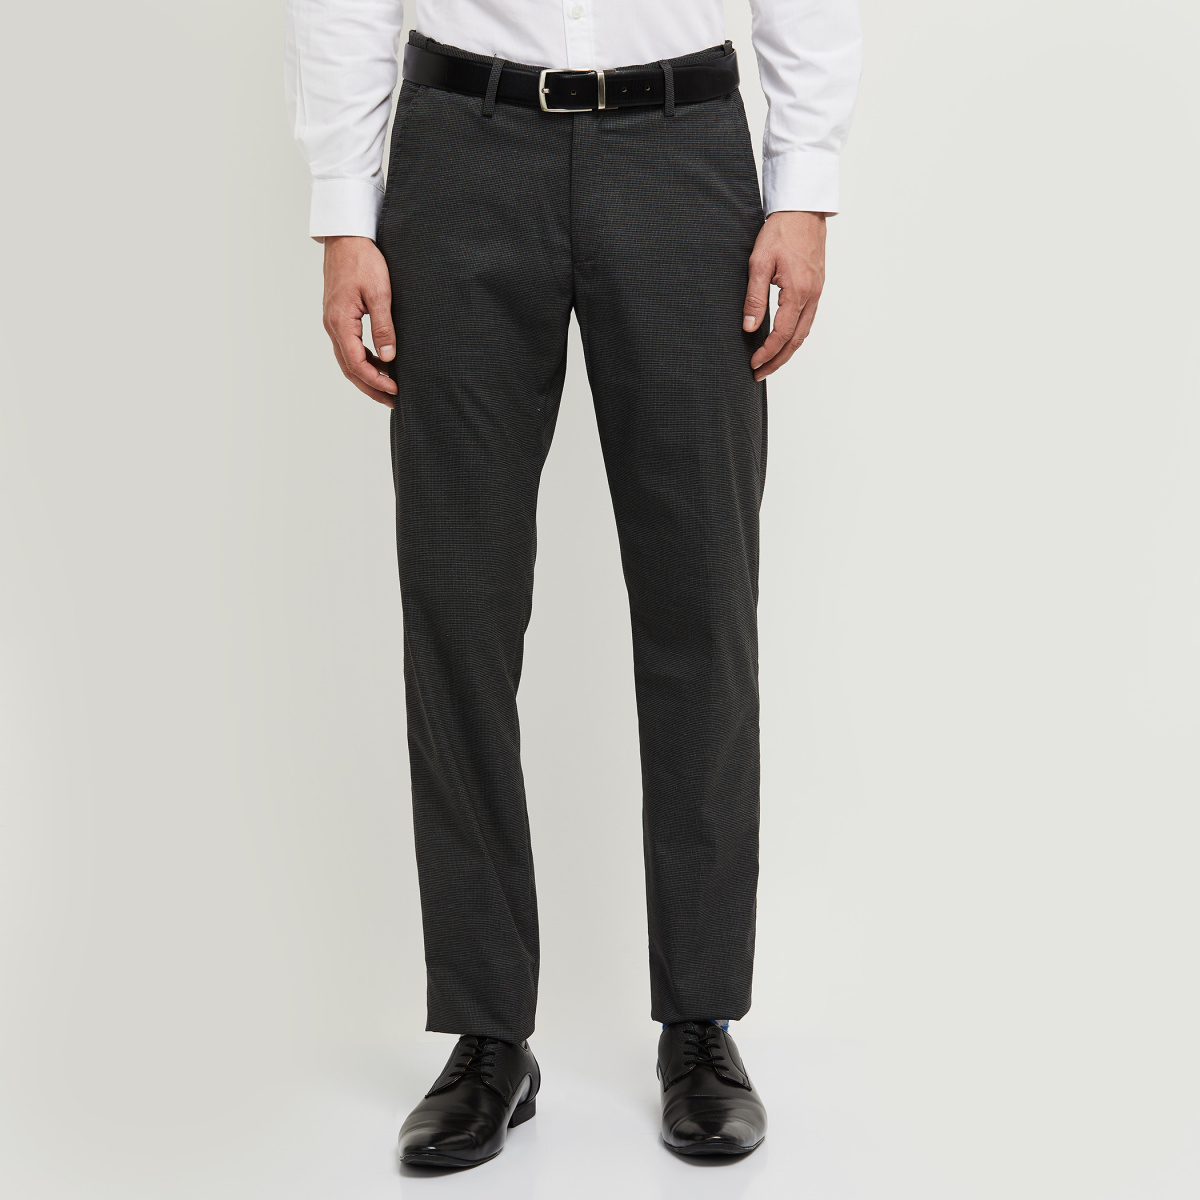 MAX Textured Slim Fit Formal Trousers